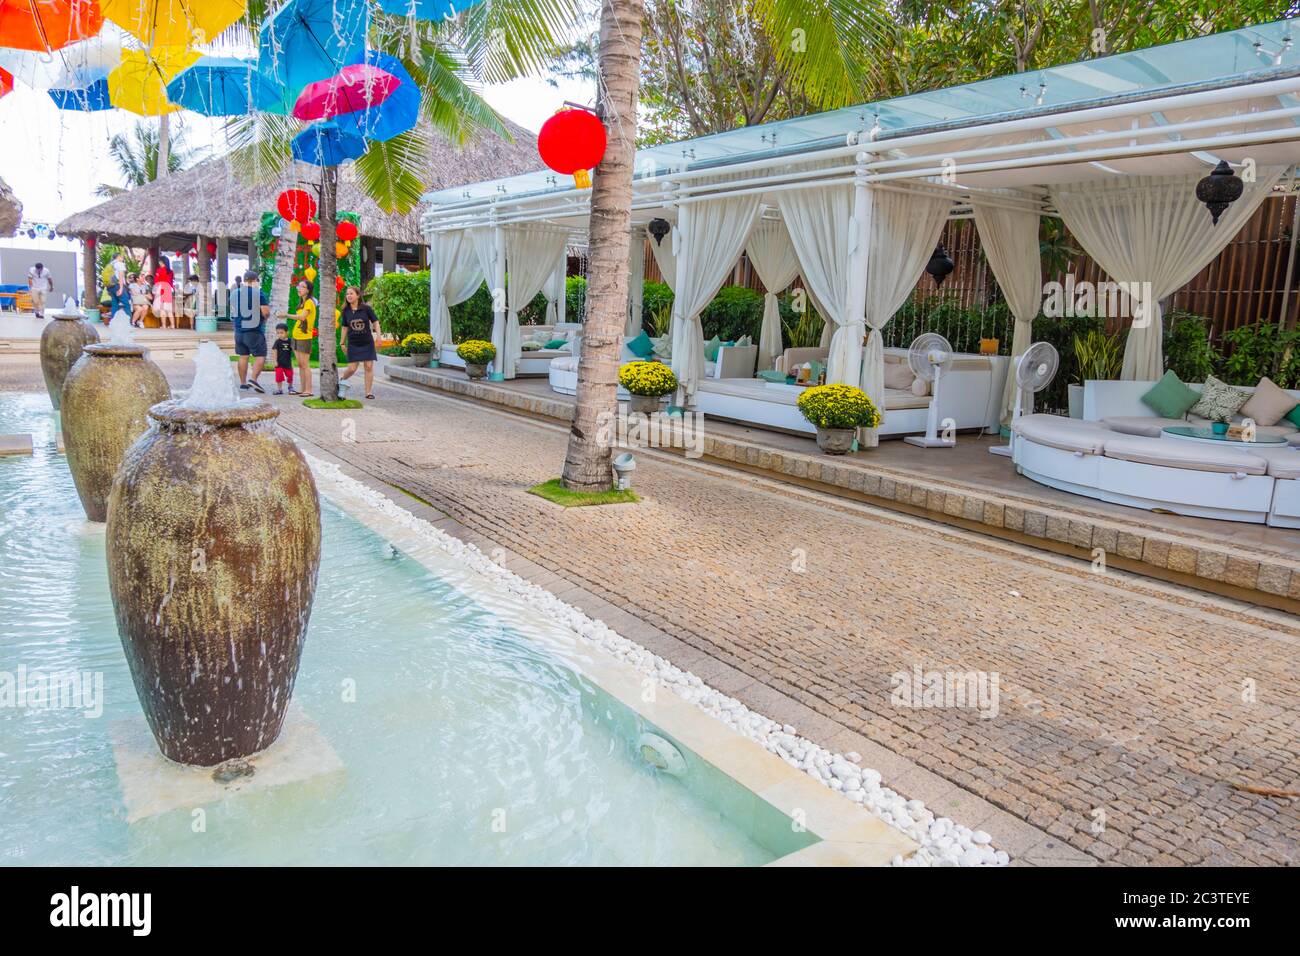 Sailing Club, beach club with restaurant and other services, beach, Nha Trang, Vietnam, Asia Stock Photo